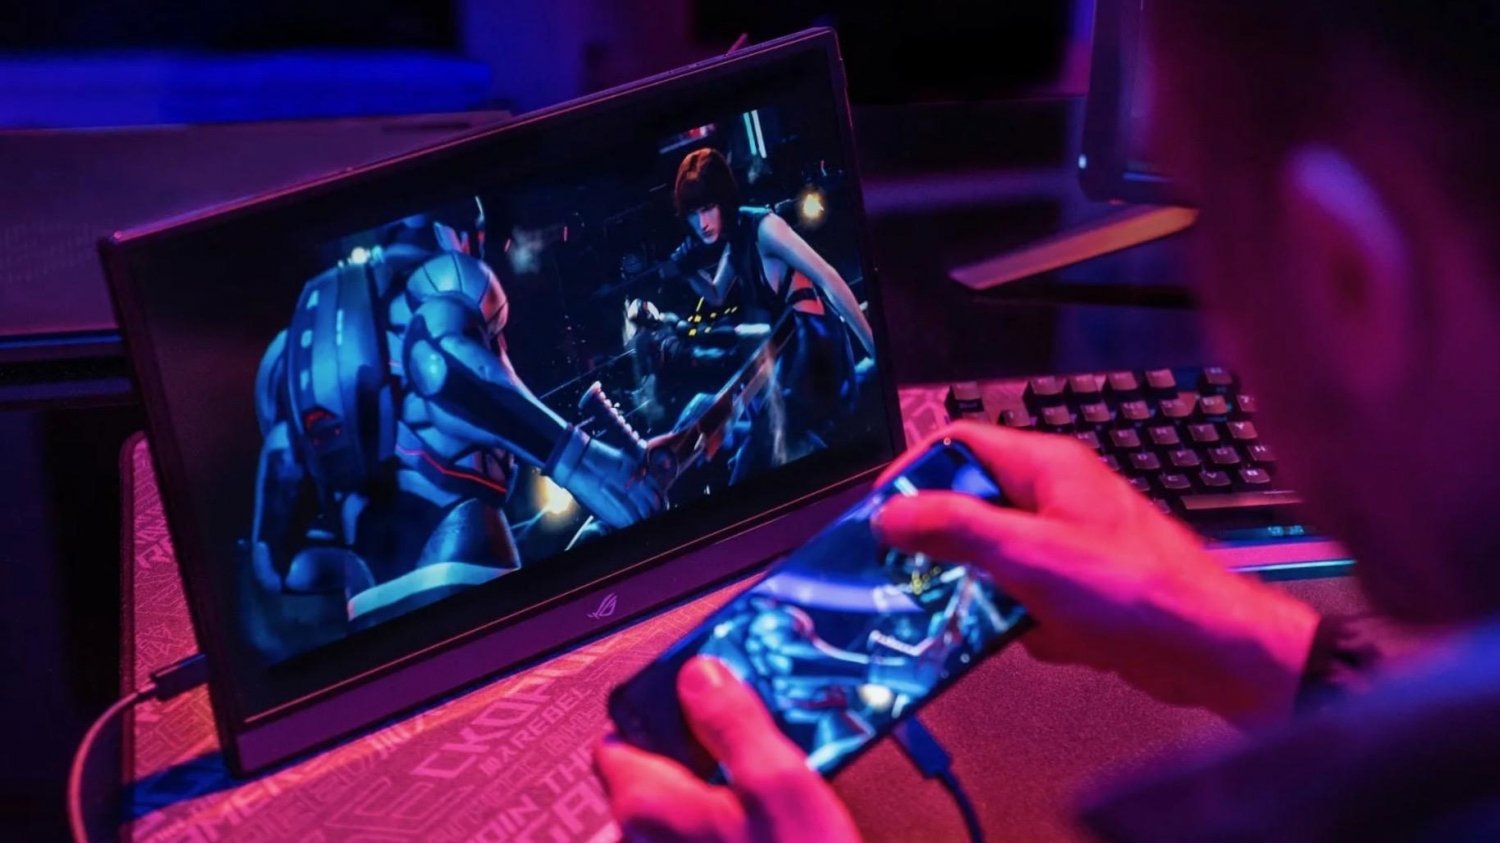 Asus unveils the ROG Strix XG16 Portable Gaming Monitor, features built in battery - Gizmochina